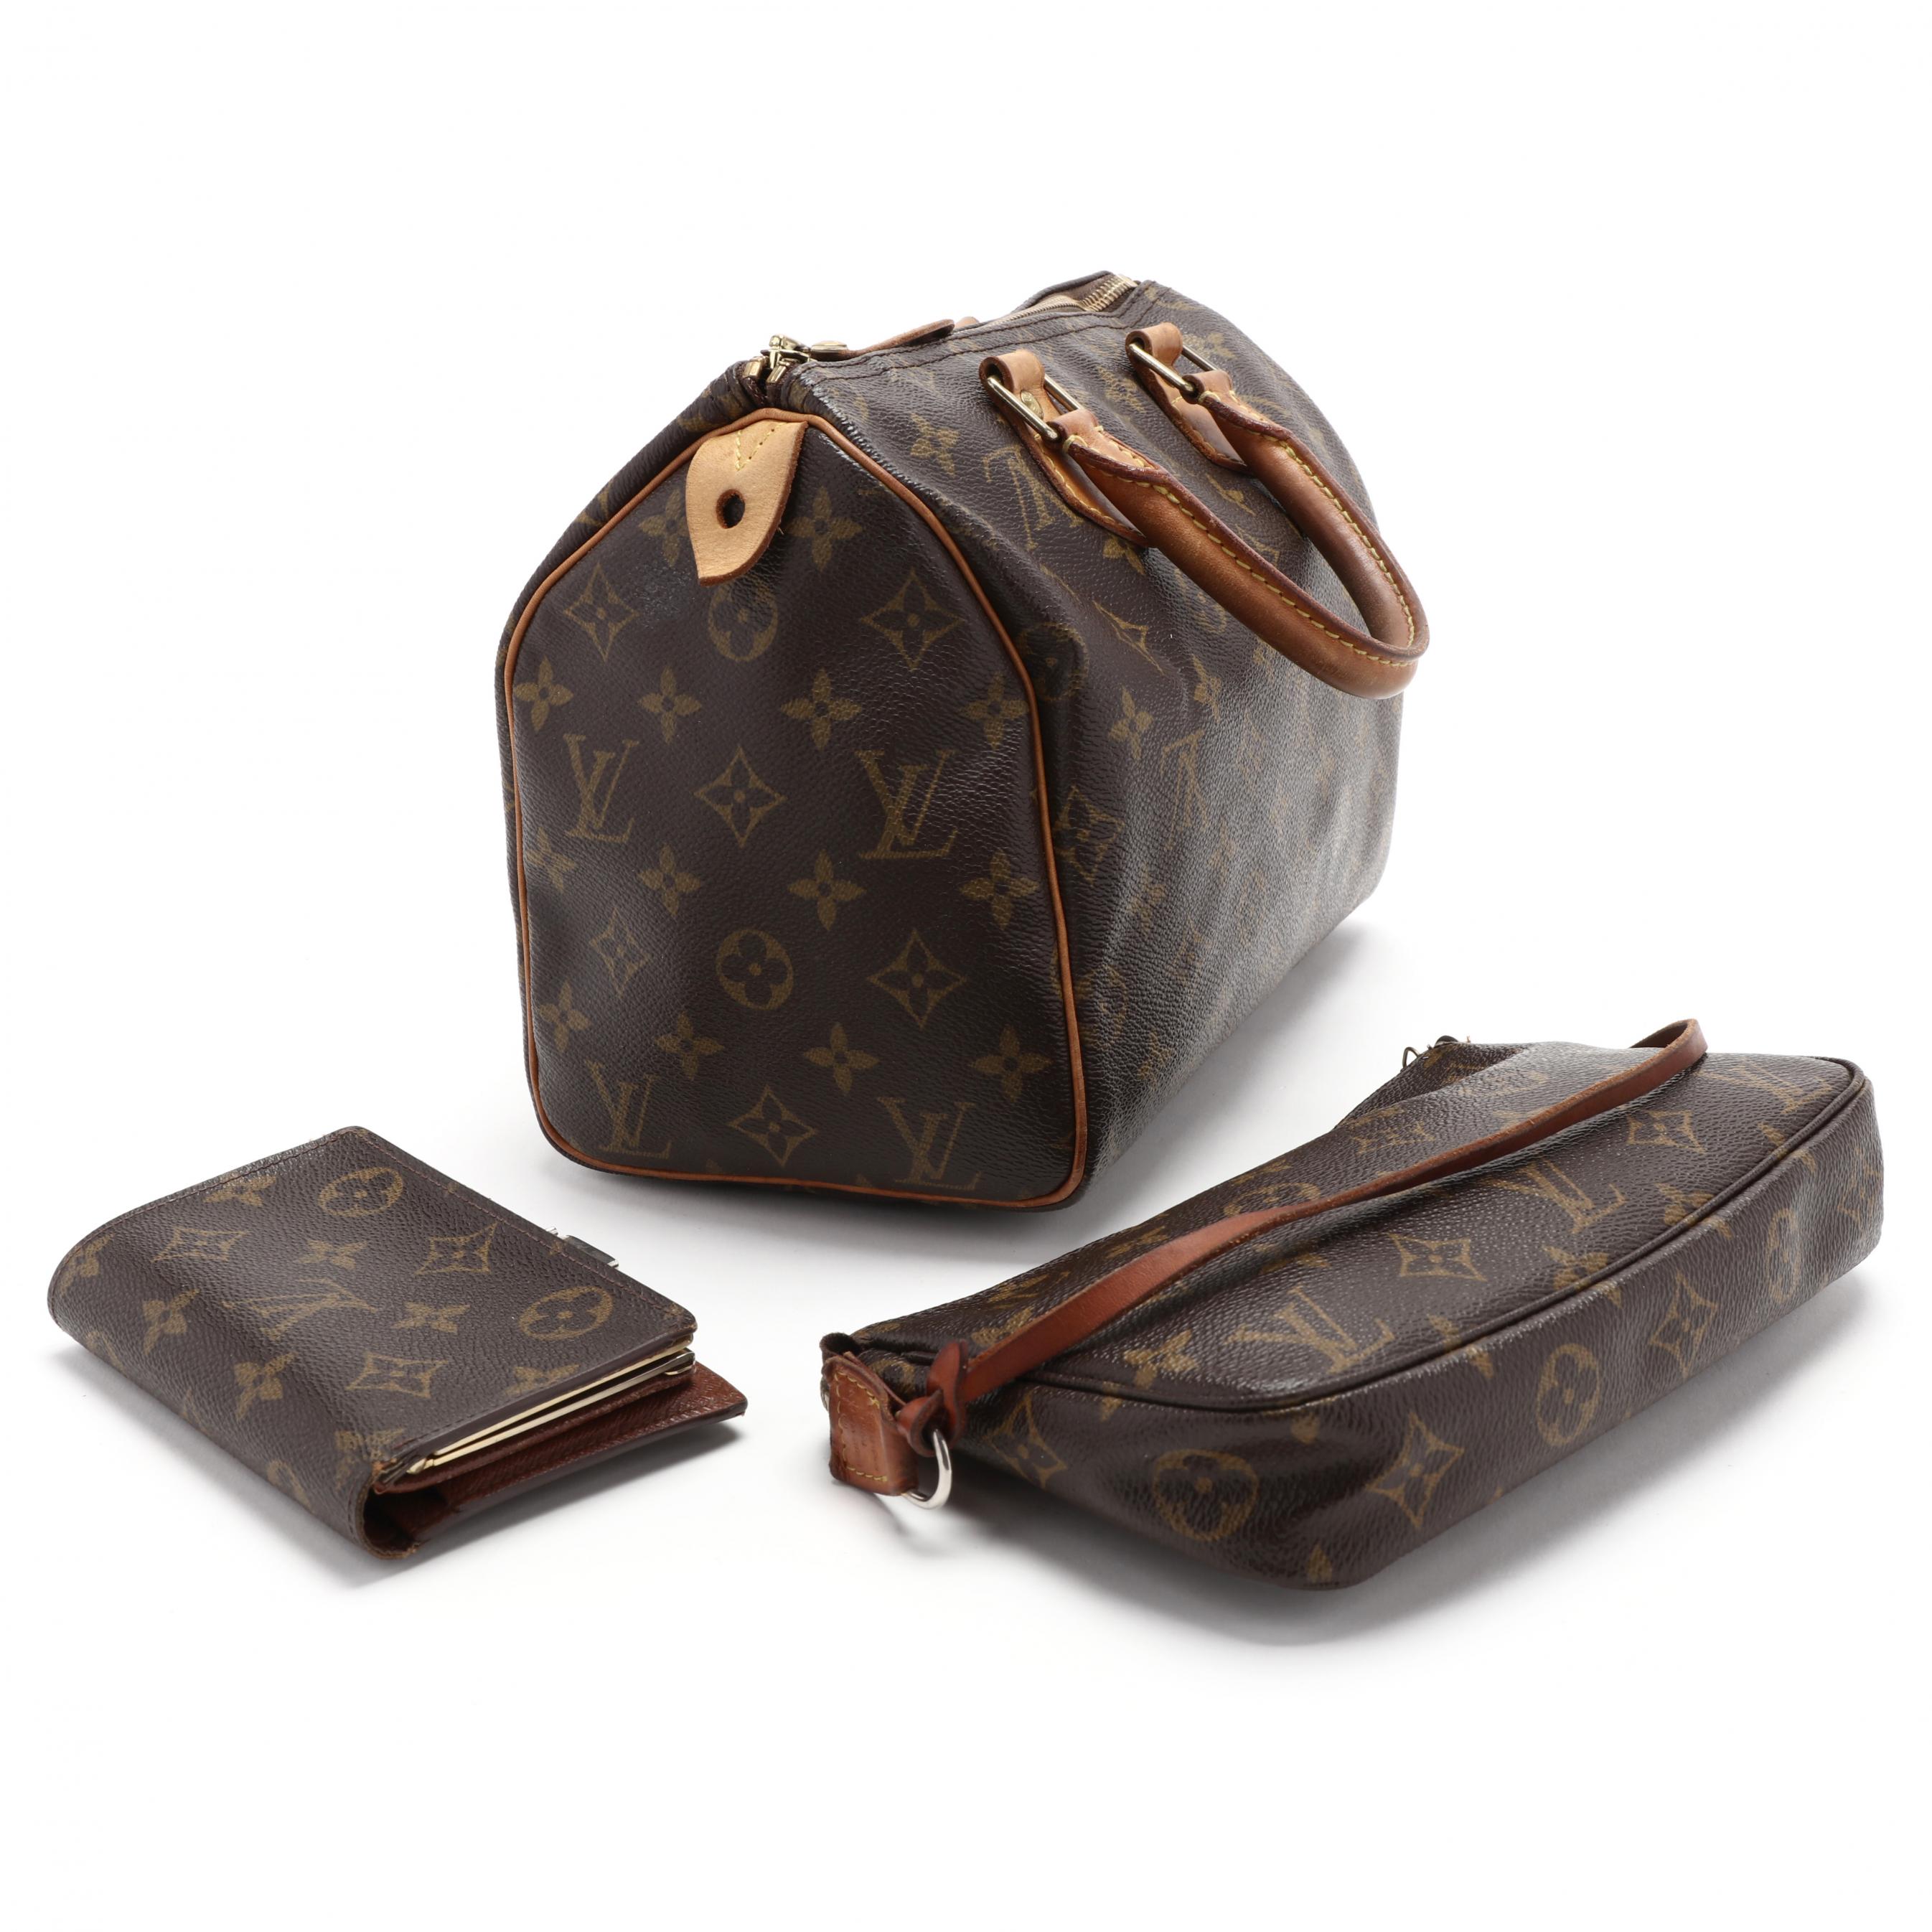 SOLD Travel in style and at a steal… Louis Vuitton Monogram Canvas